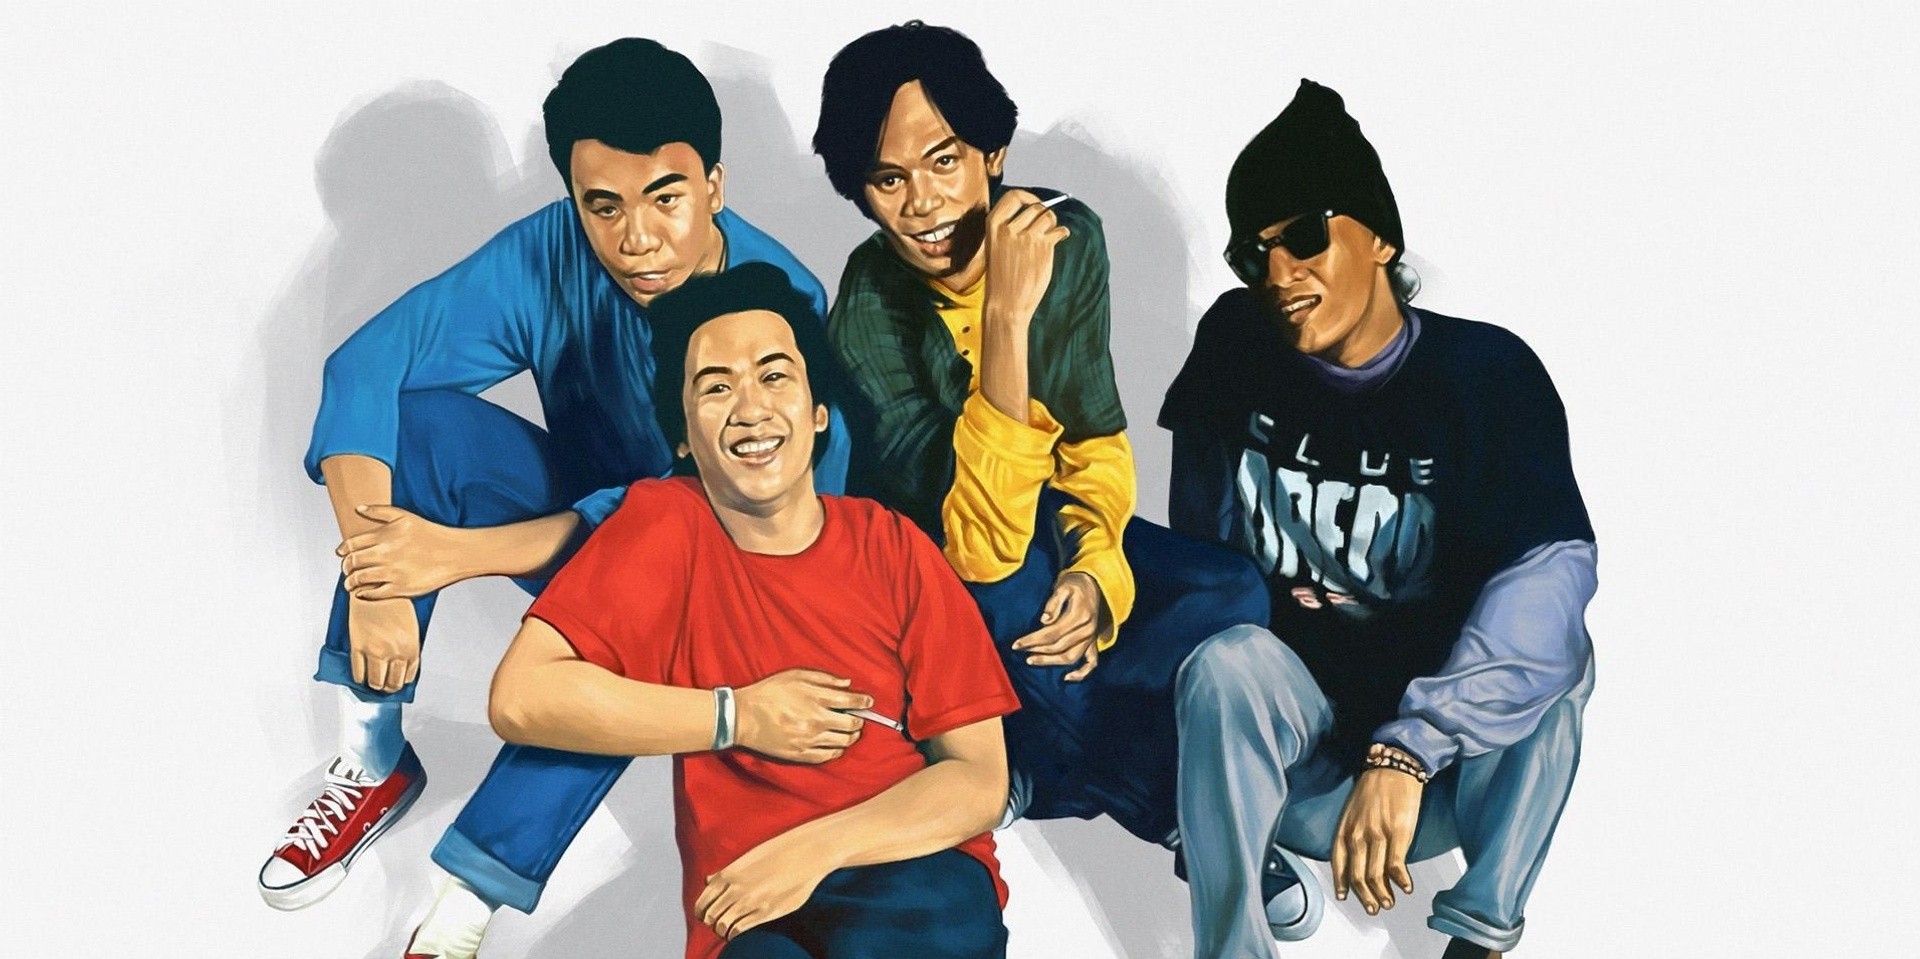 Linya-Linya team up with Eraserheads for special collaborative shirt